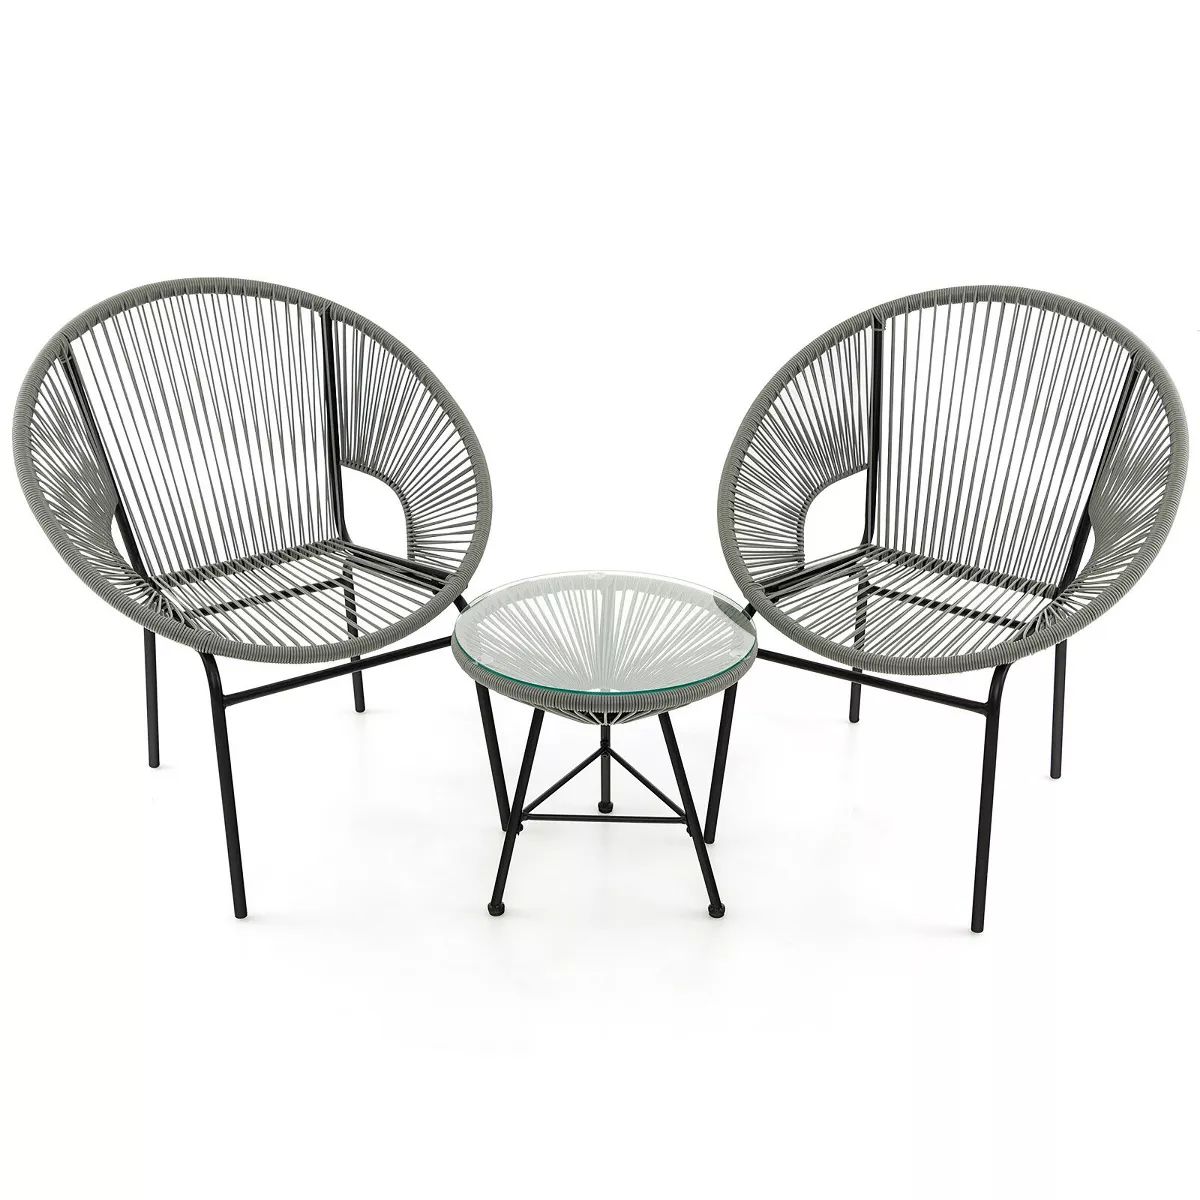 Tangkula 3 Pieces Acapulco Chair Set Wicker Conversation Bistro Set w/ Tempered Glass Table | Target